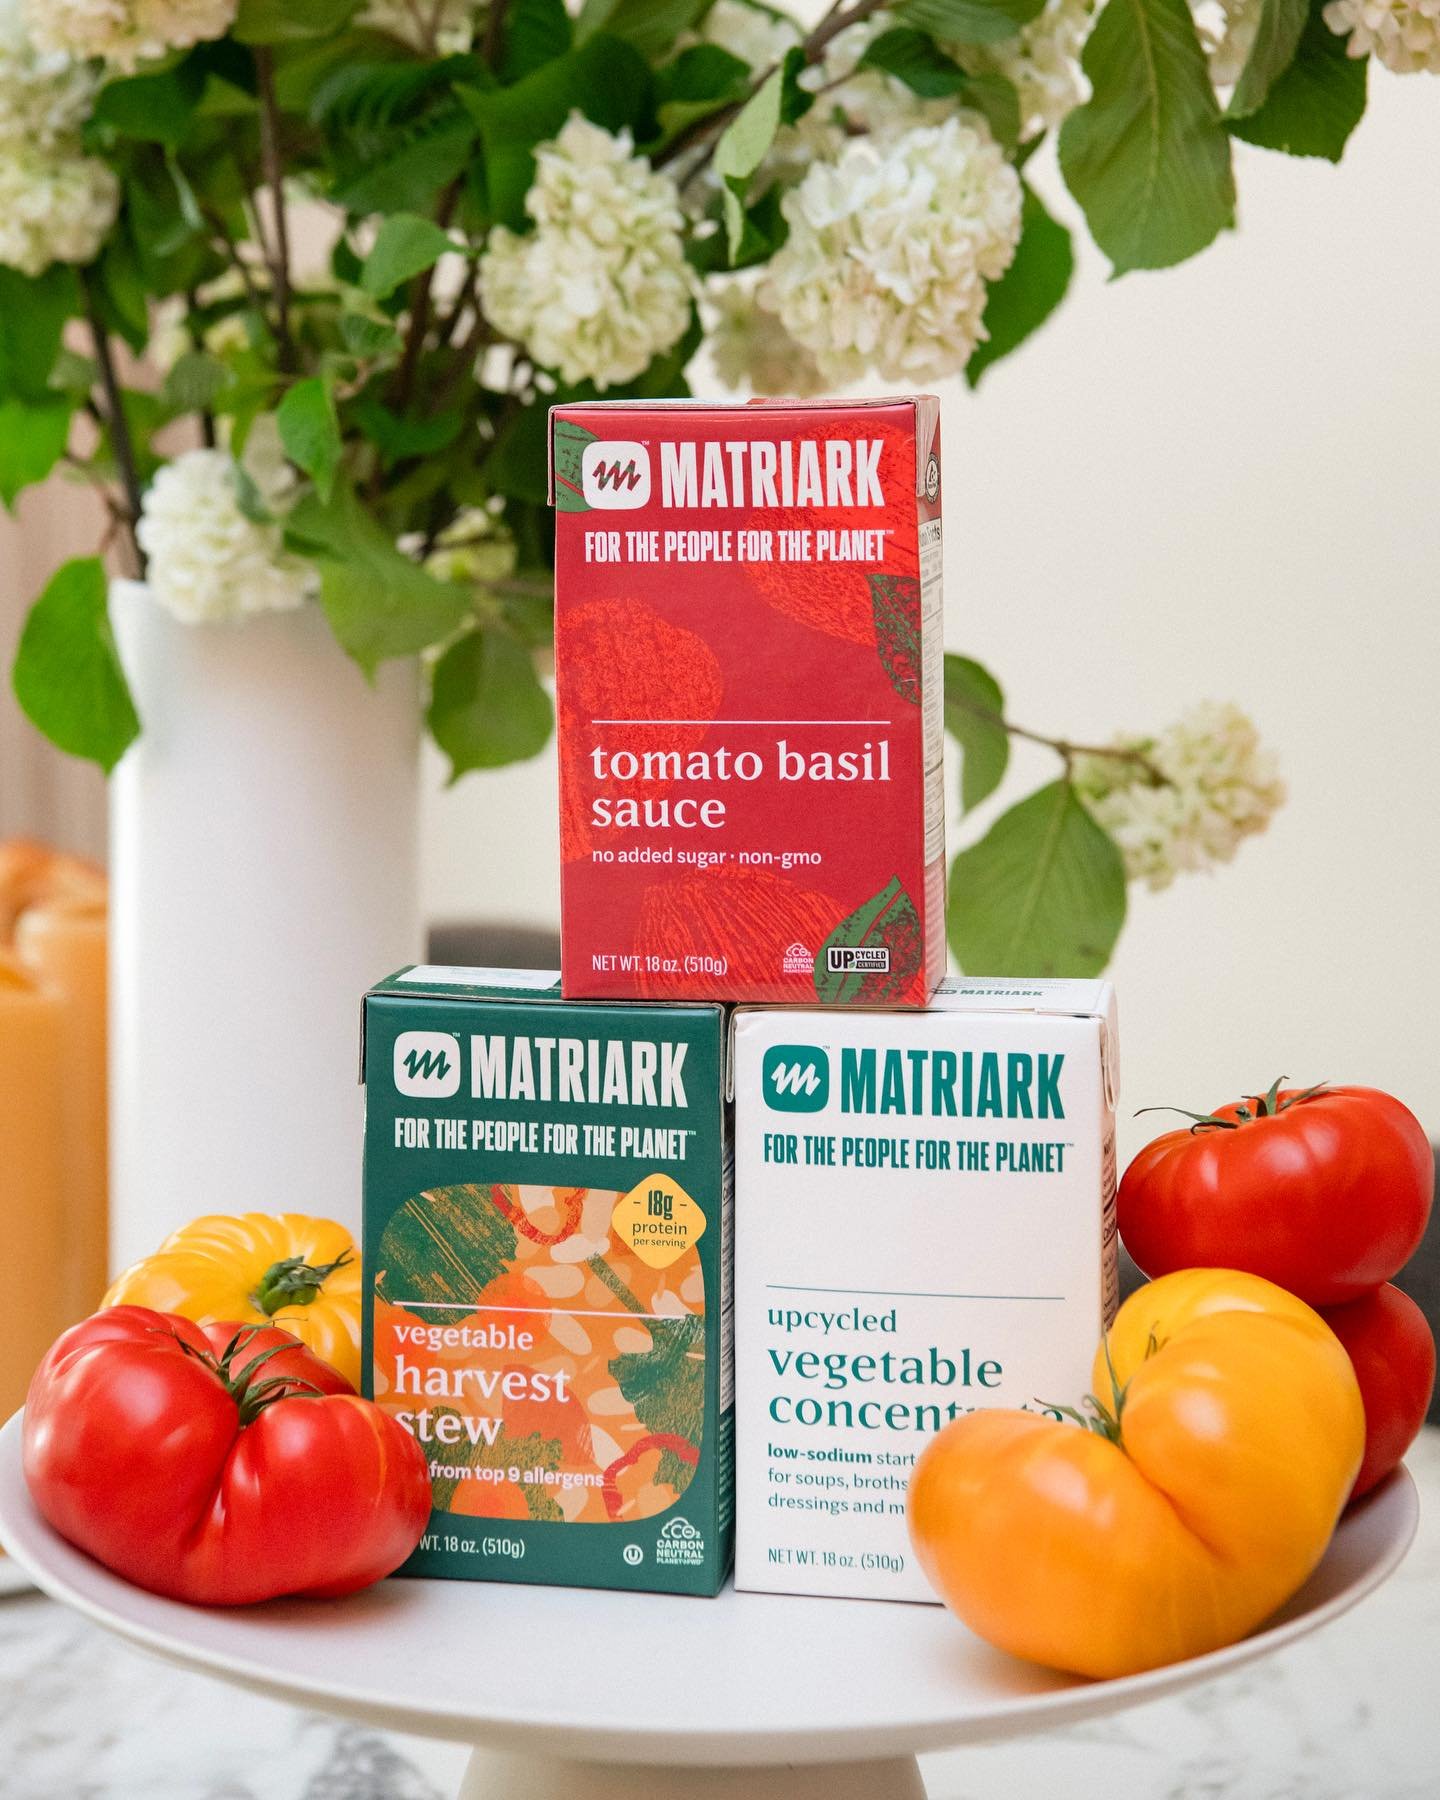 We had a wonderful evening at the @lets_go_furthermore tasting party last week, which spotlighted Matriark &amp; several other trail blazing woman-owned brands including @renewalmill @drinksarilla @drinkmadmarvlus @whiteleafprovisions @westbourne all